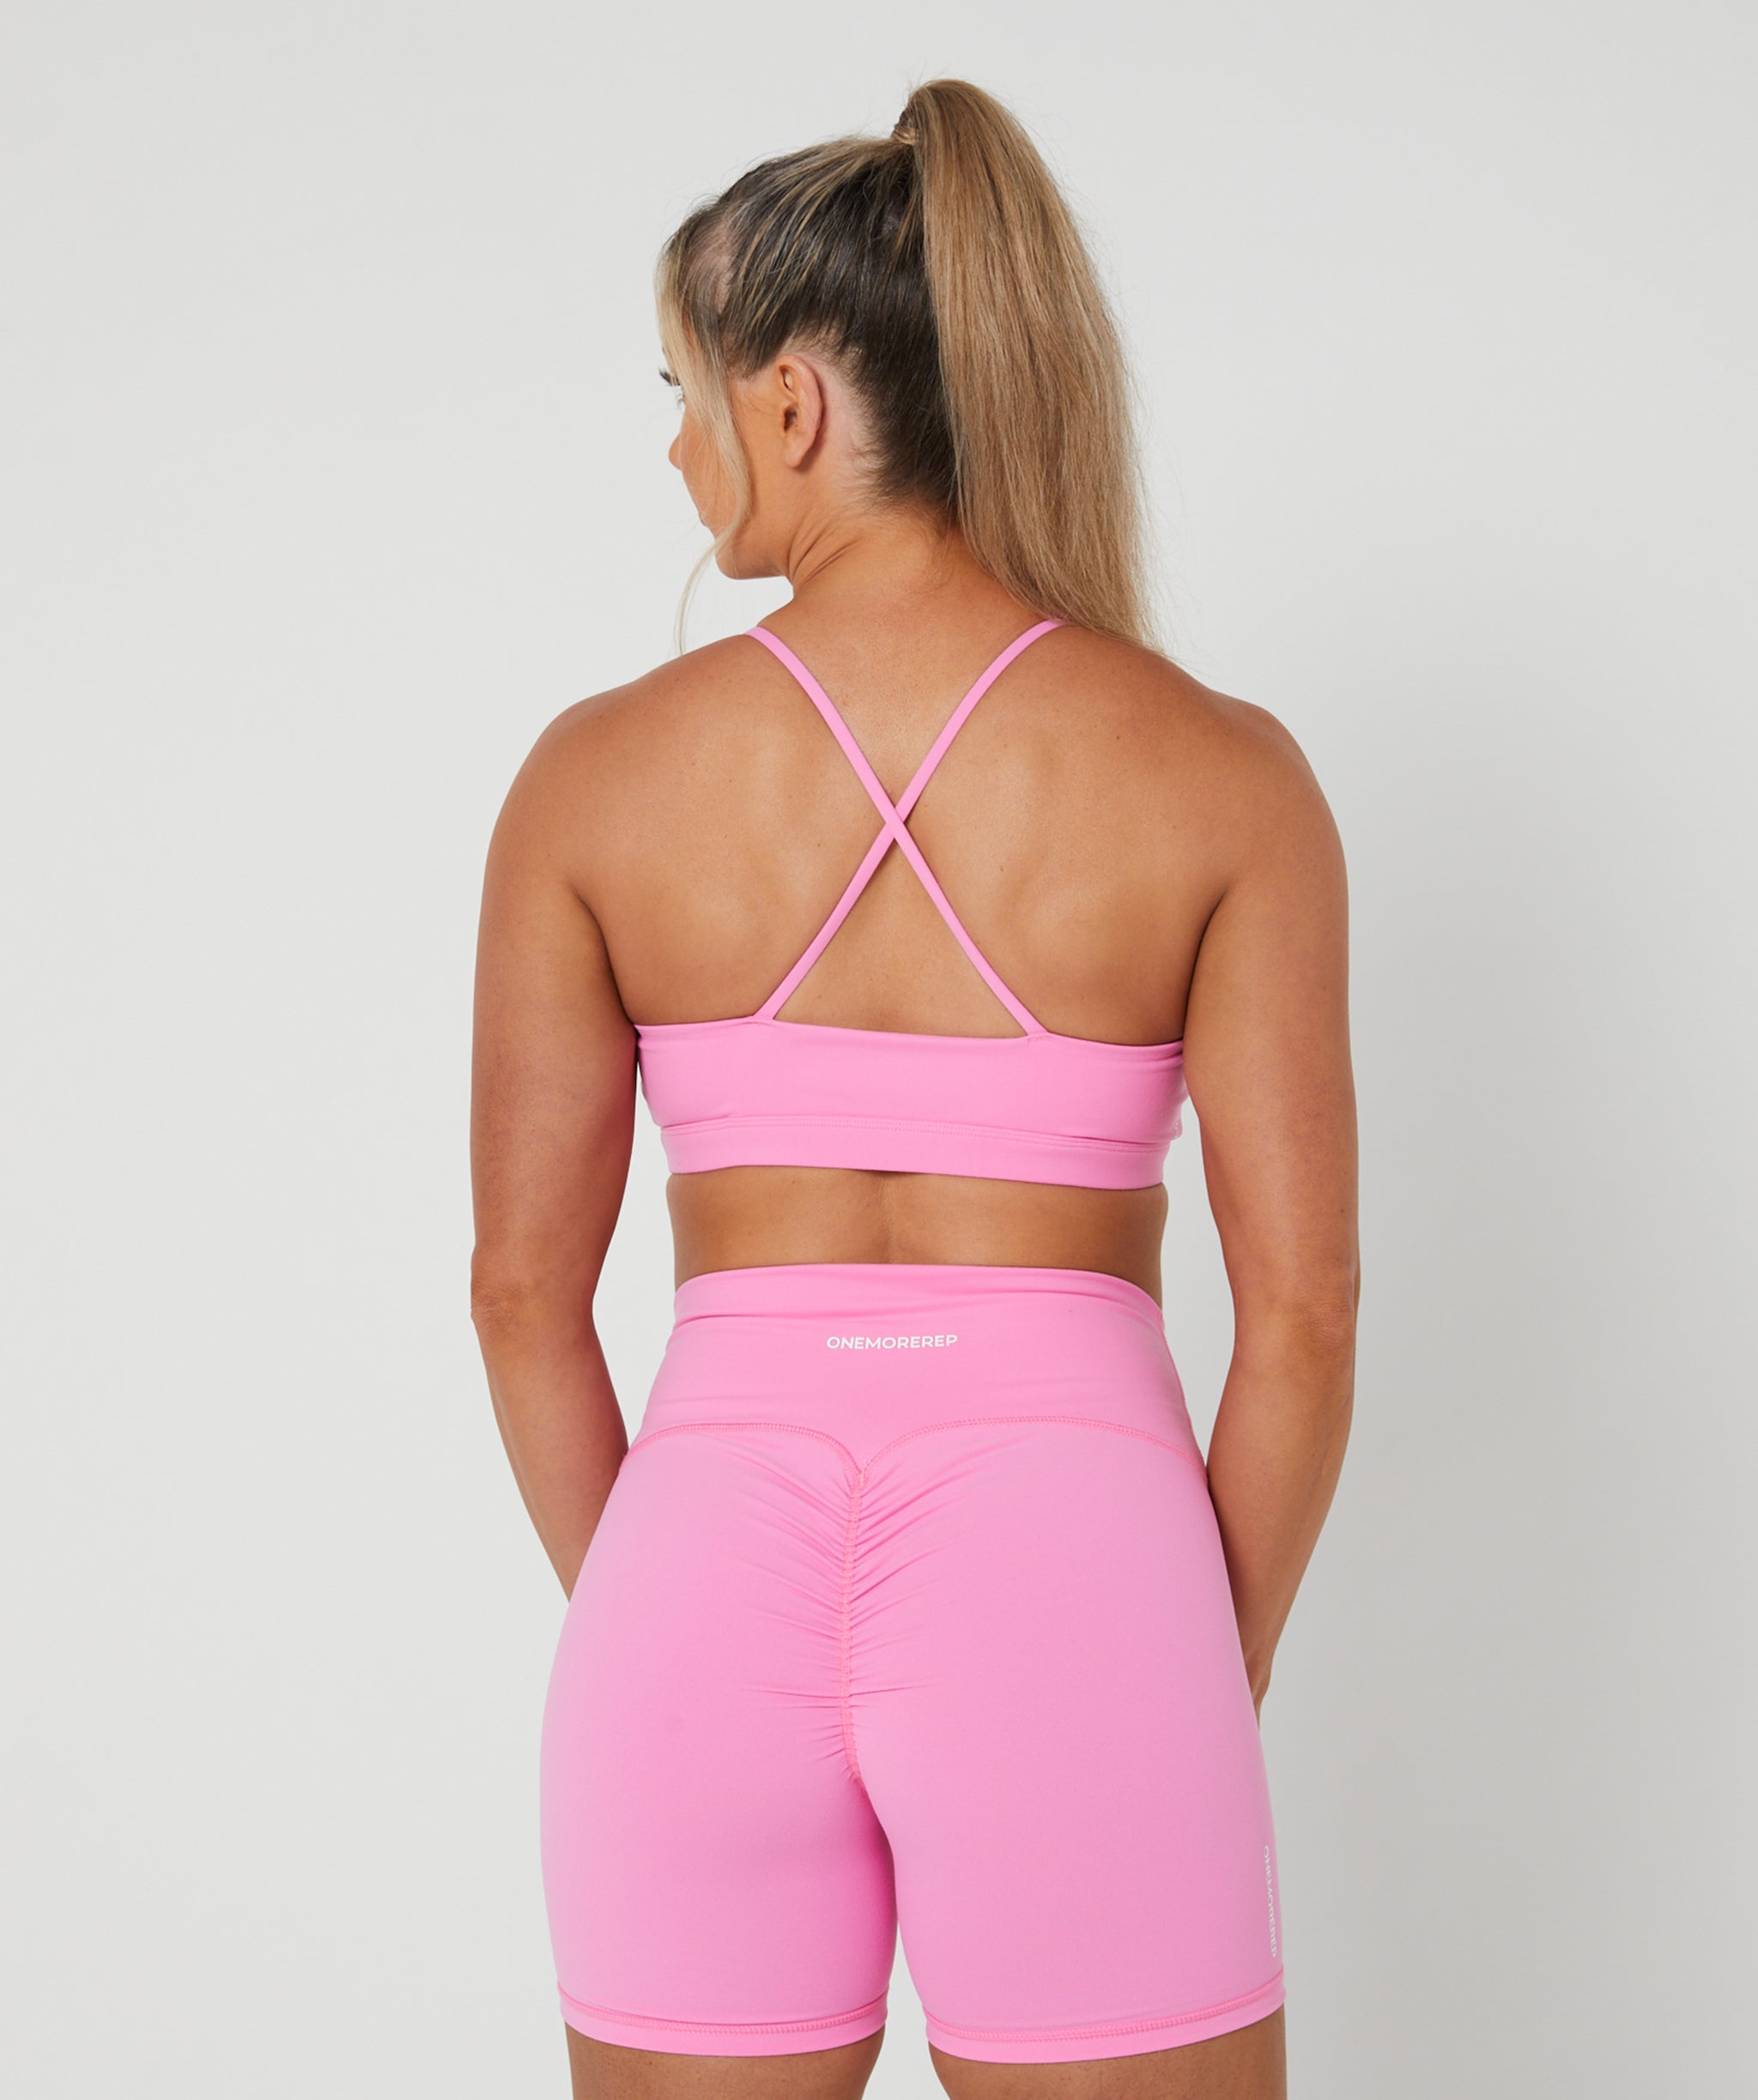 Core Strappy Sports Bra Candy Pink – OneMoreRep